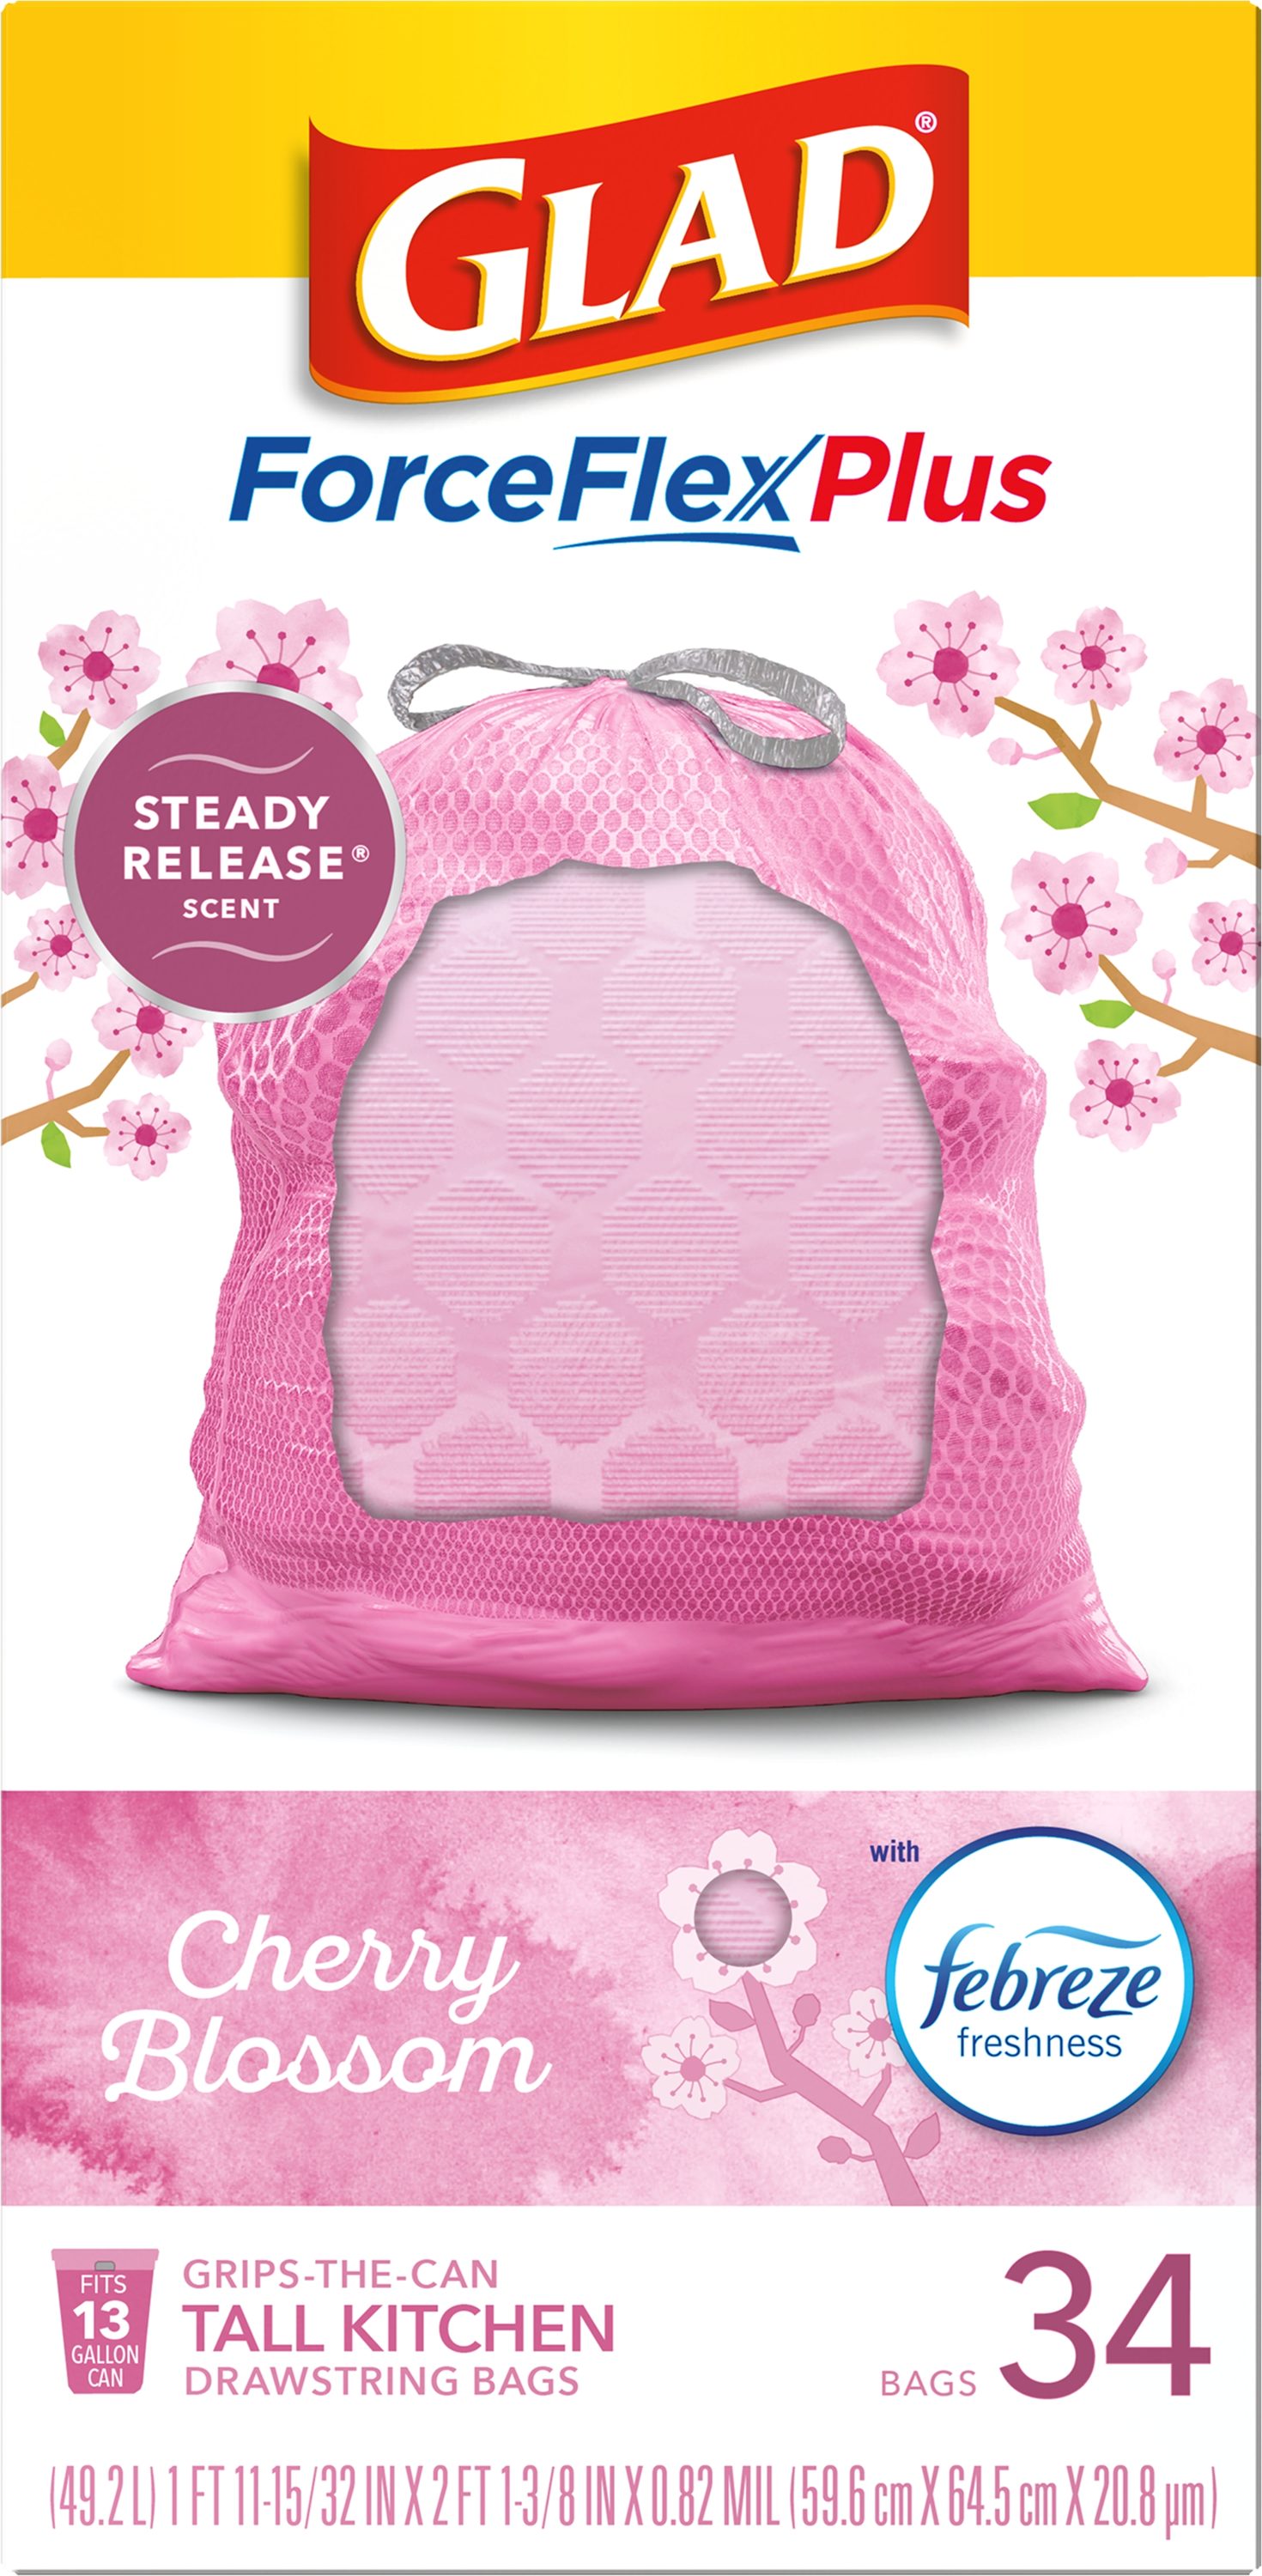 Introducing the newest Glad ForceFlexPlus Cherry Blossom scent